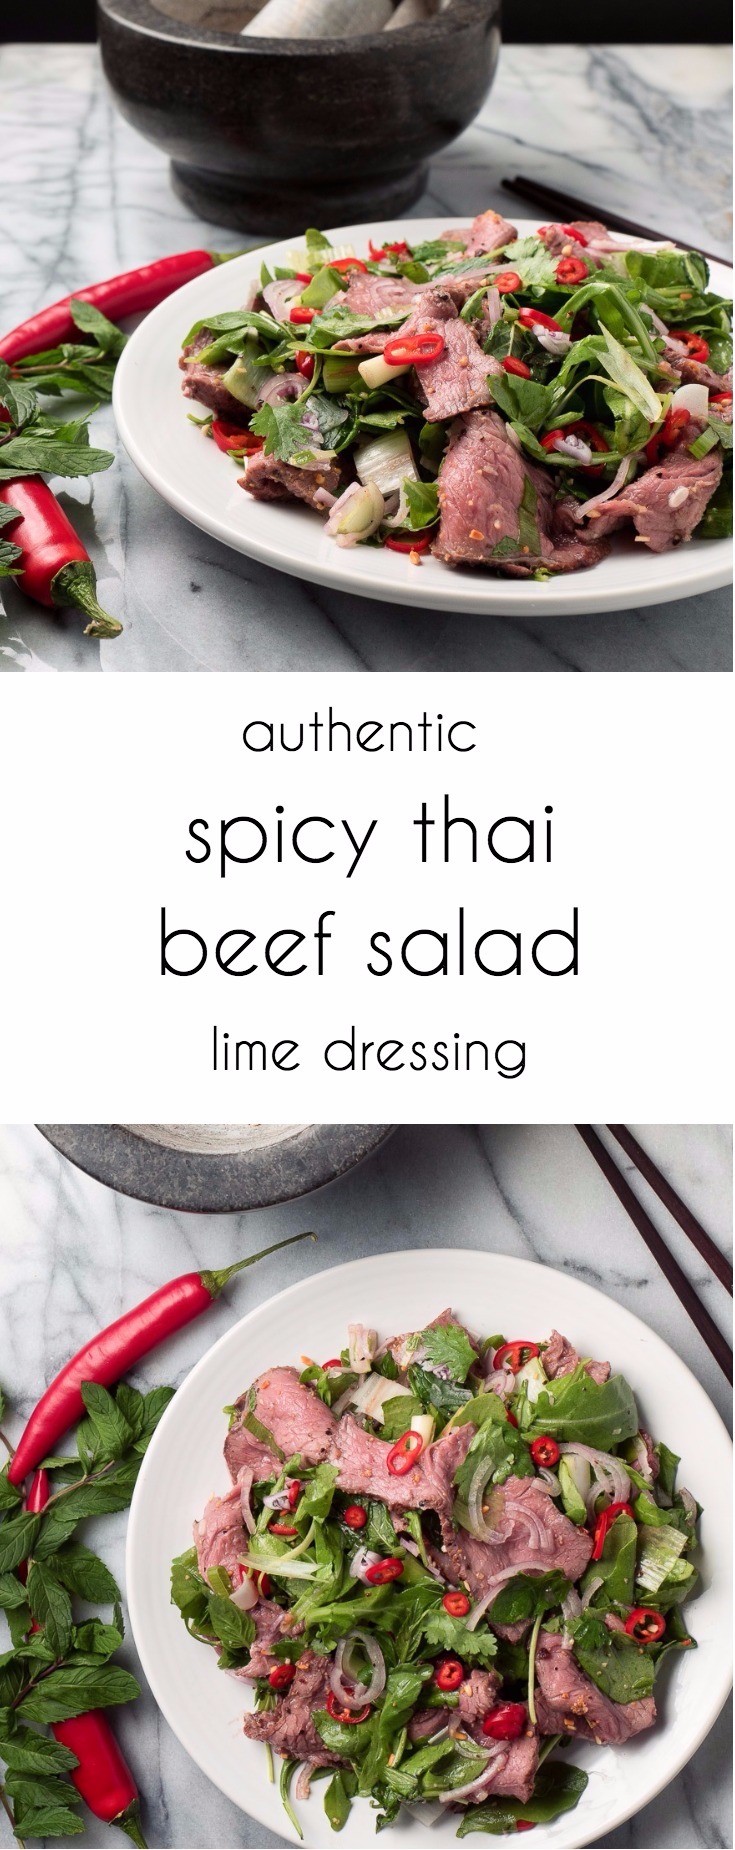 Spicy Thai beef salad with mint, chili and citrus dressing.